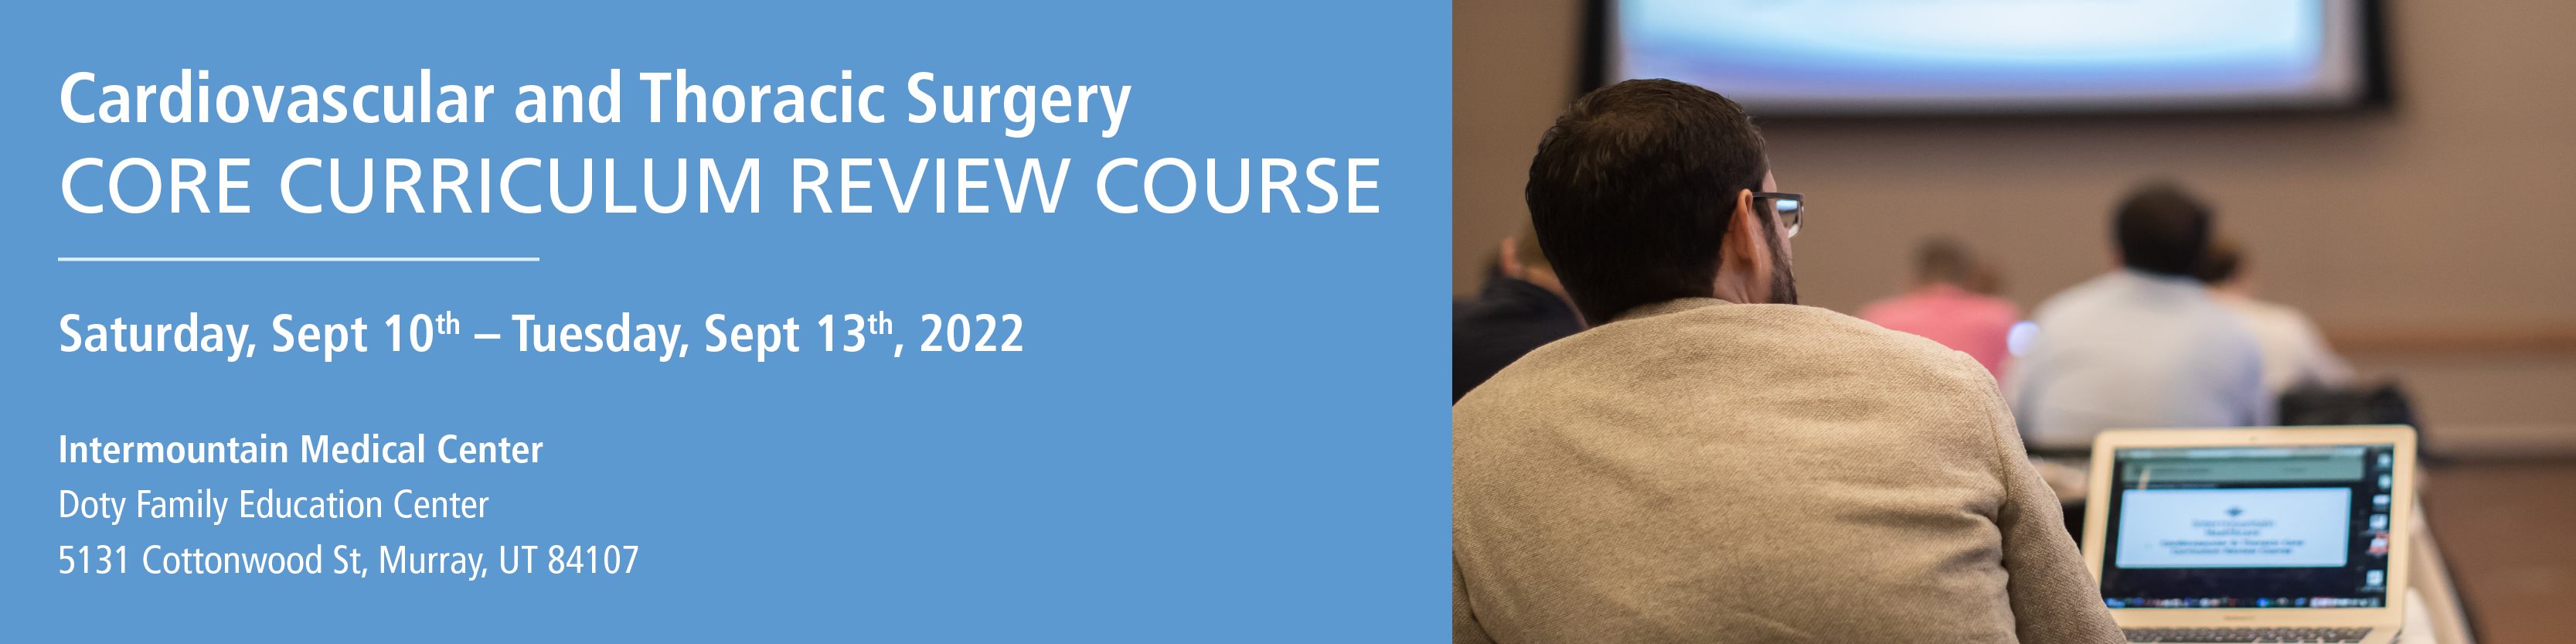 Cardiovascular and Thoracic Surgery Core Curriculum Review Course - 2022 Banner